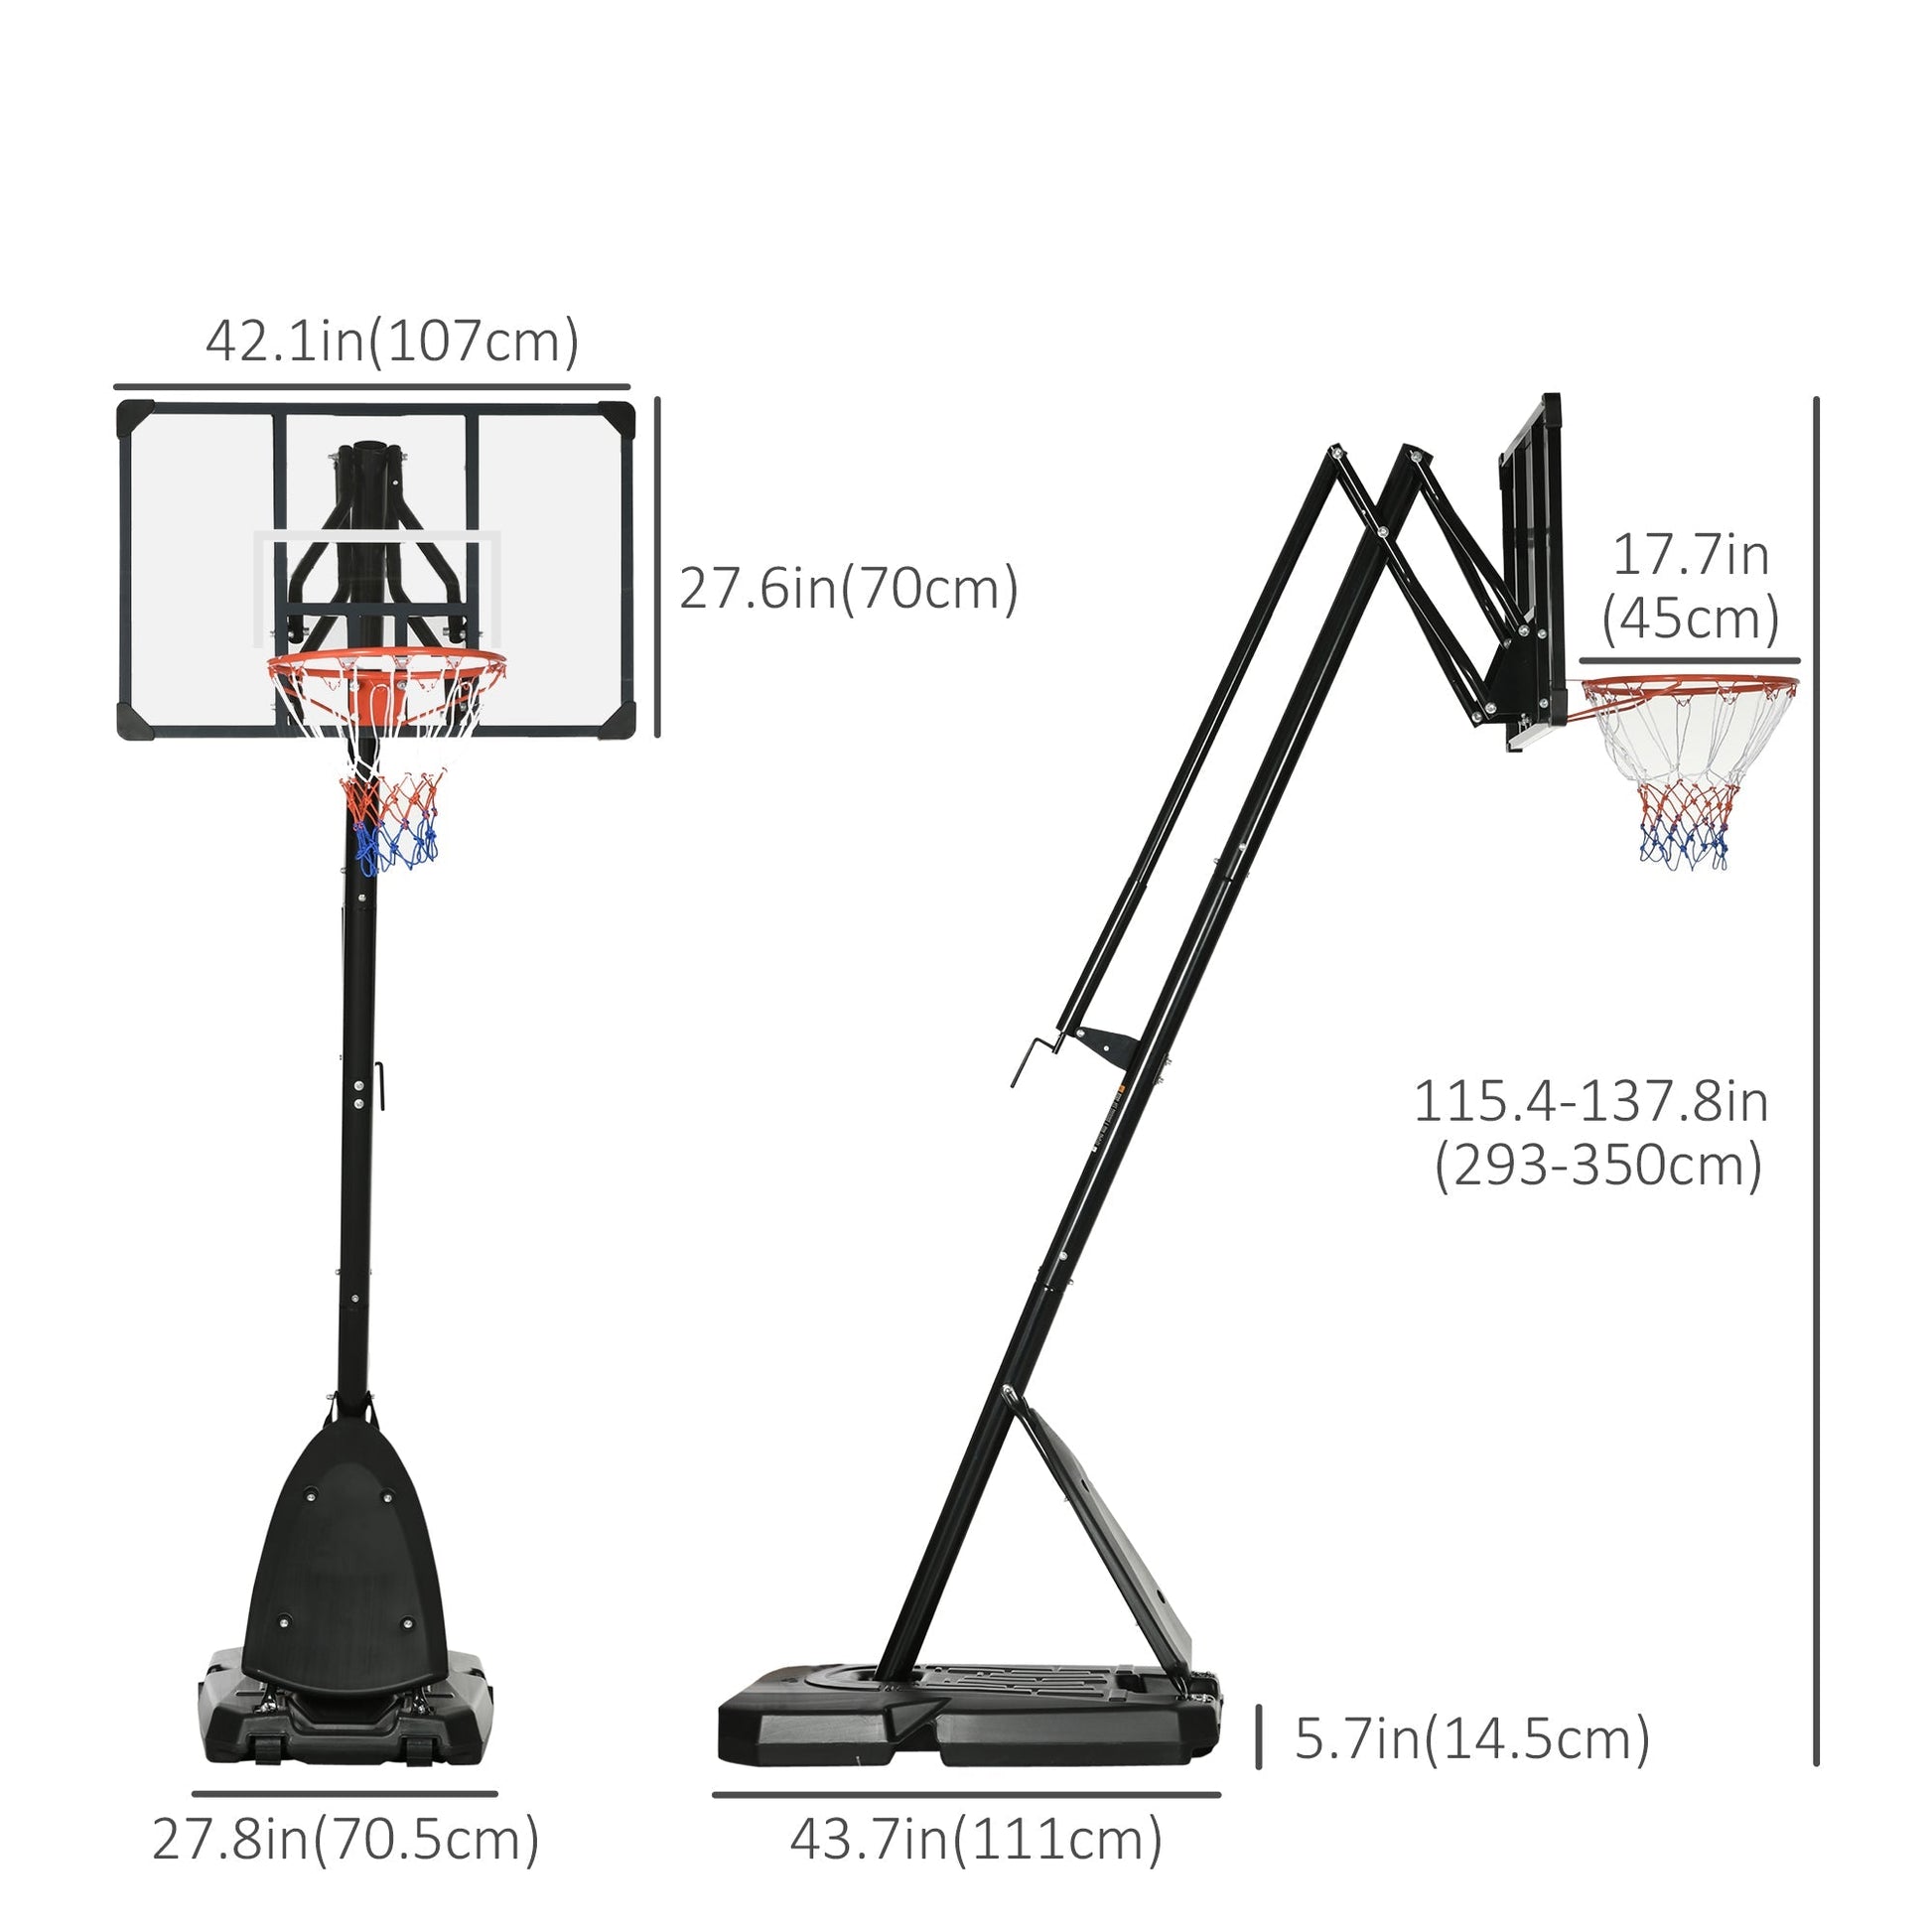 Outdoor Portable Basketball Hoop and Stand with Backboard Weighted Base Wheels, 115.4"-137.8" Height Adjustable - Gallery Canada